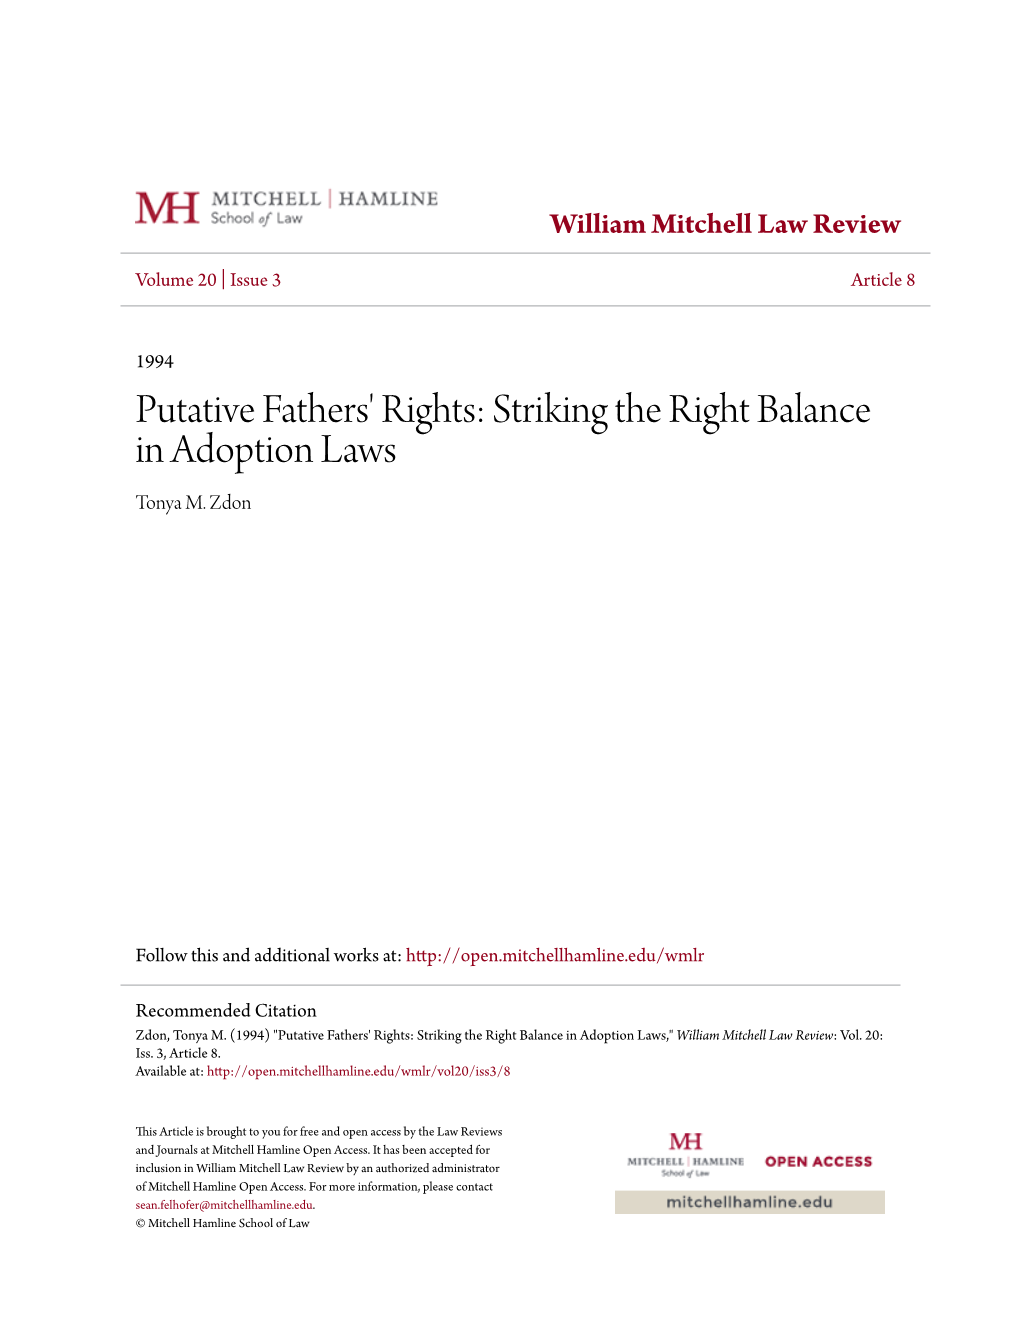 Putative Fathers' Rights: Striking the Right Balance in Adoption Laws Tonya M